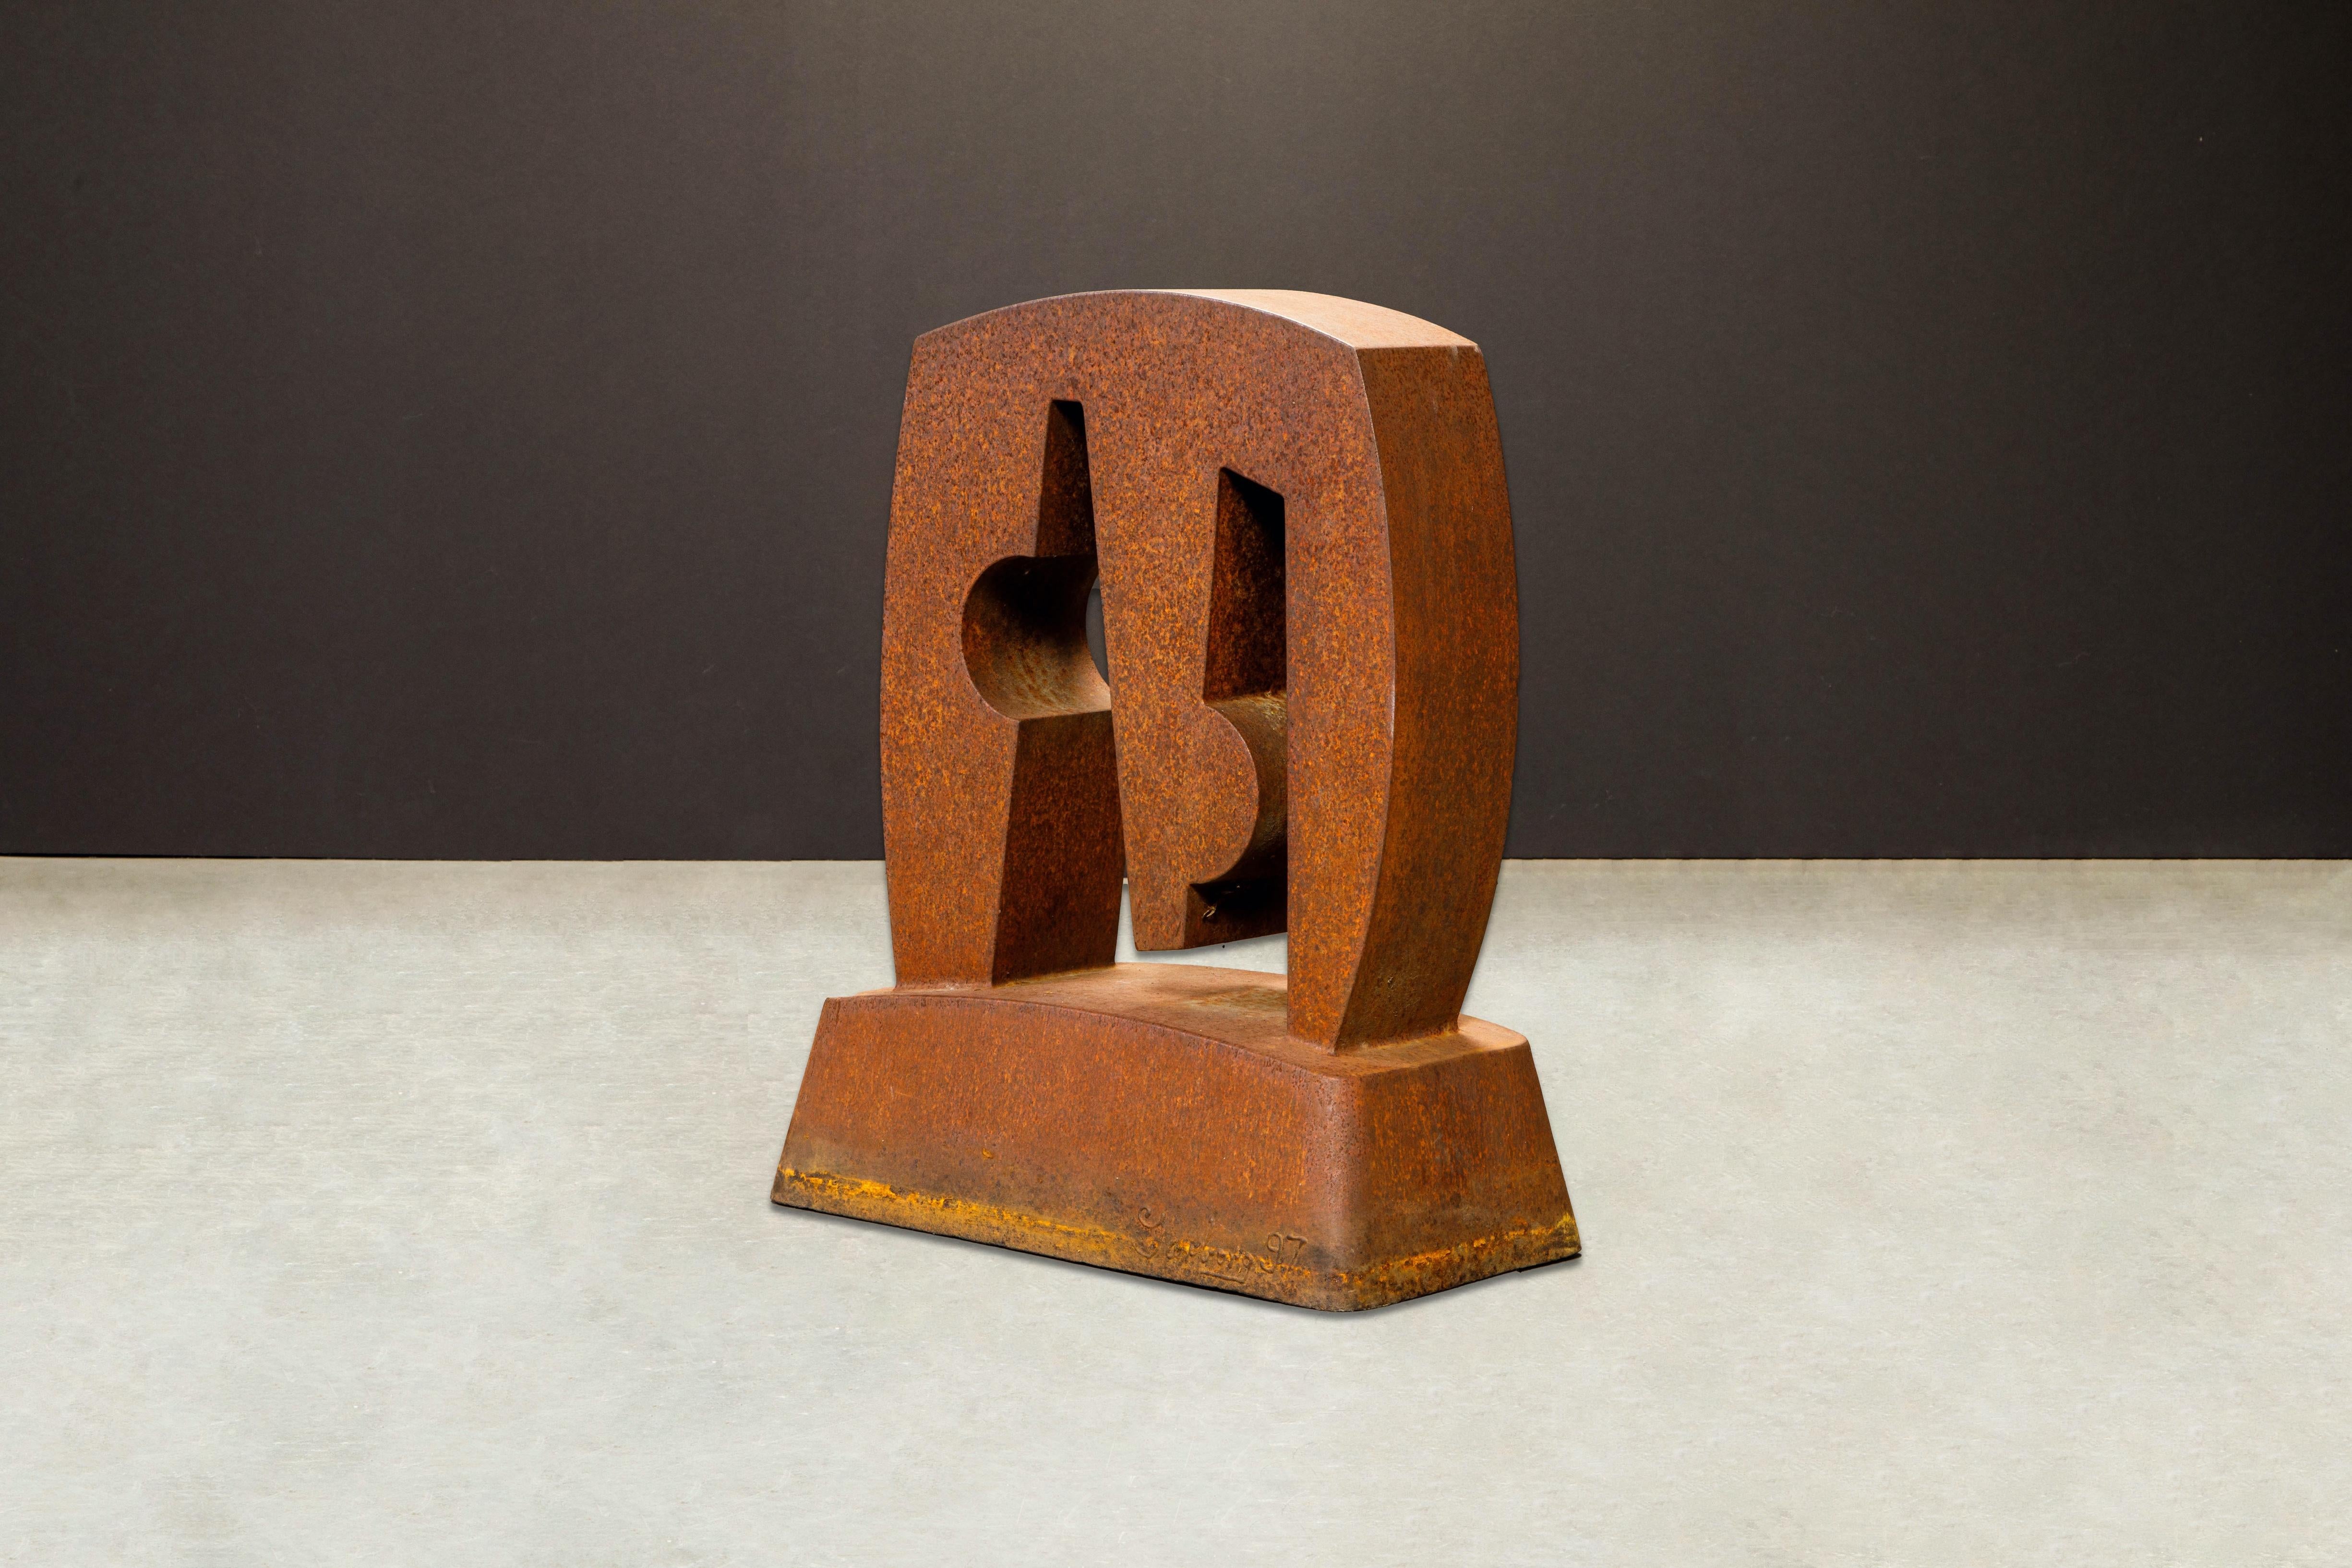 Late 20th Century Patinated Steel Sculpture by Arnie Garborg, Signed and Dated 1997